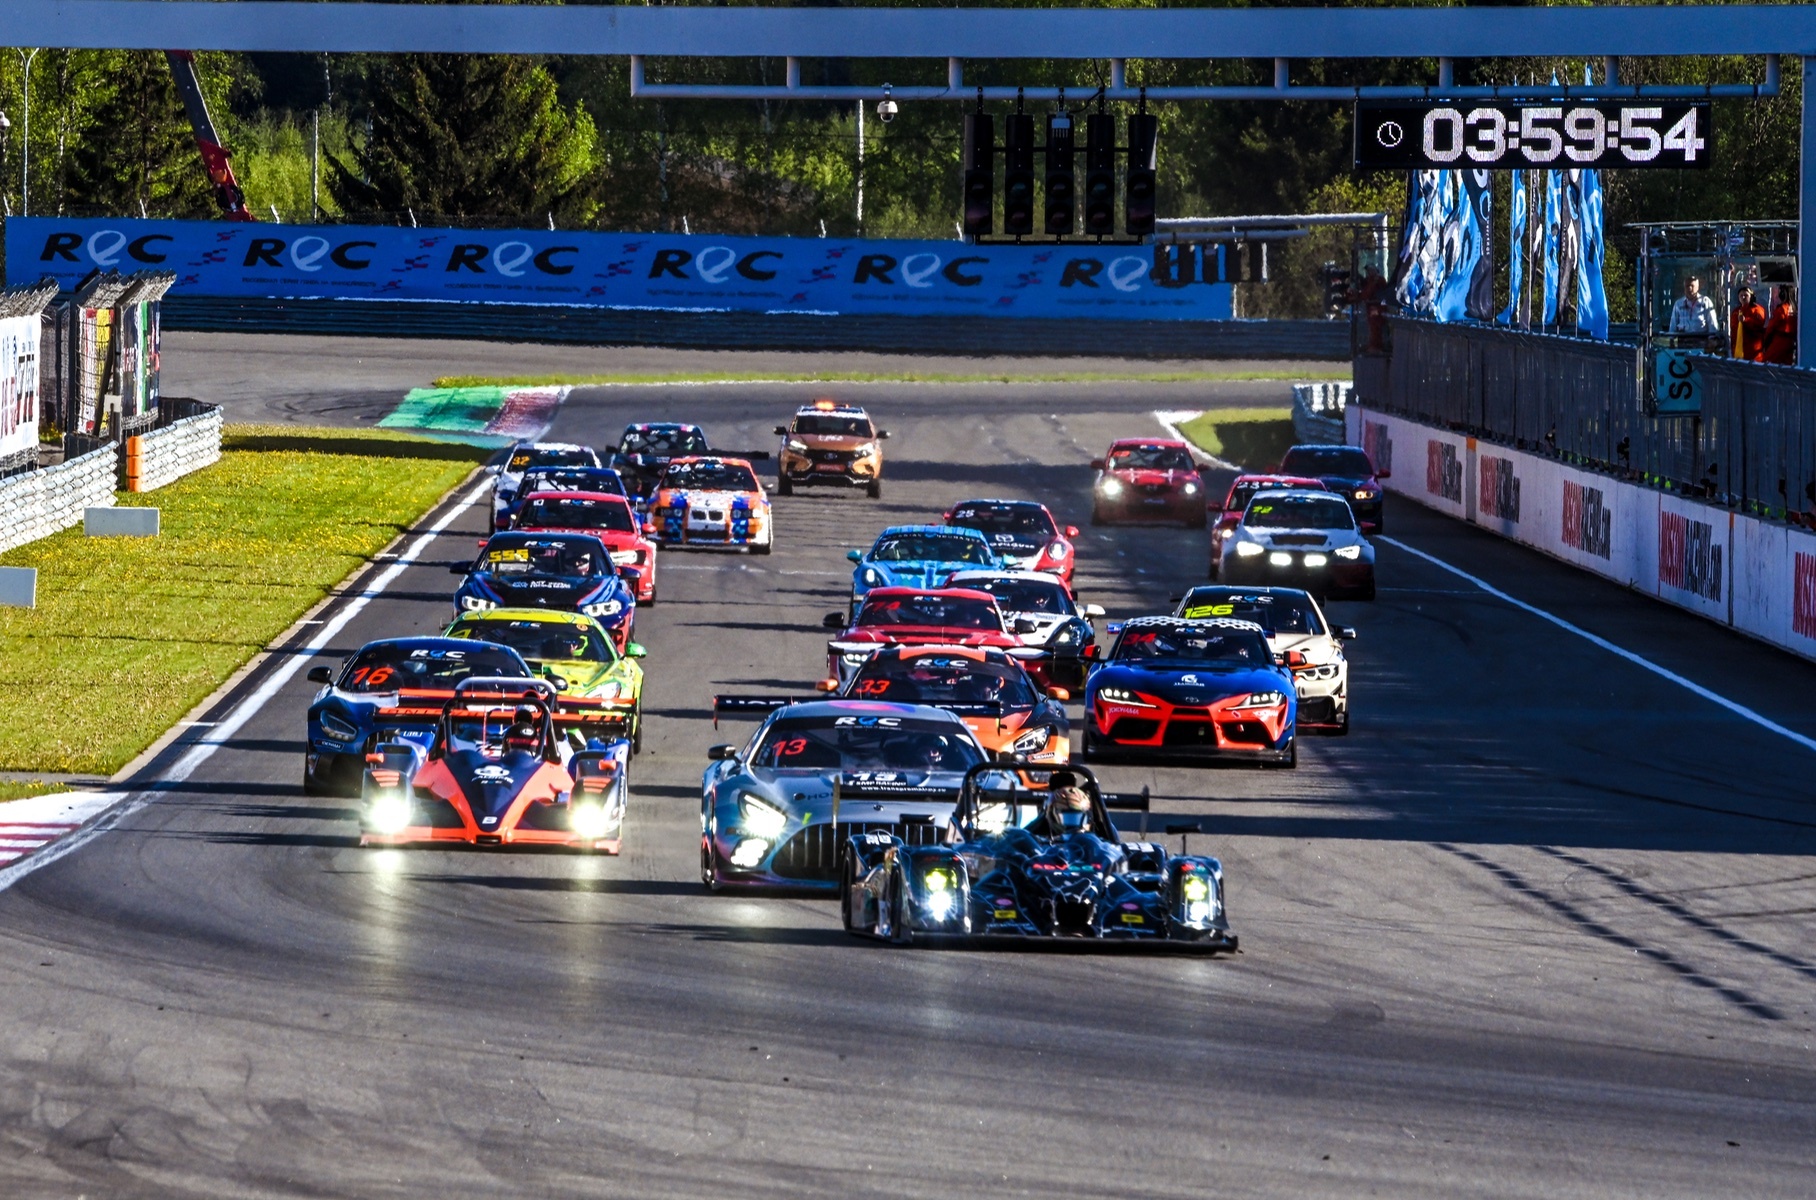 REC: the second stage of the Russian endurance racing series will be held in the Moscow region